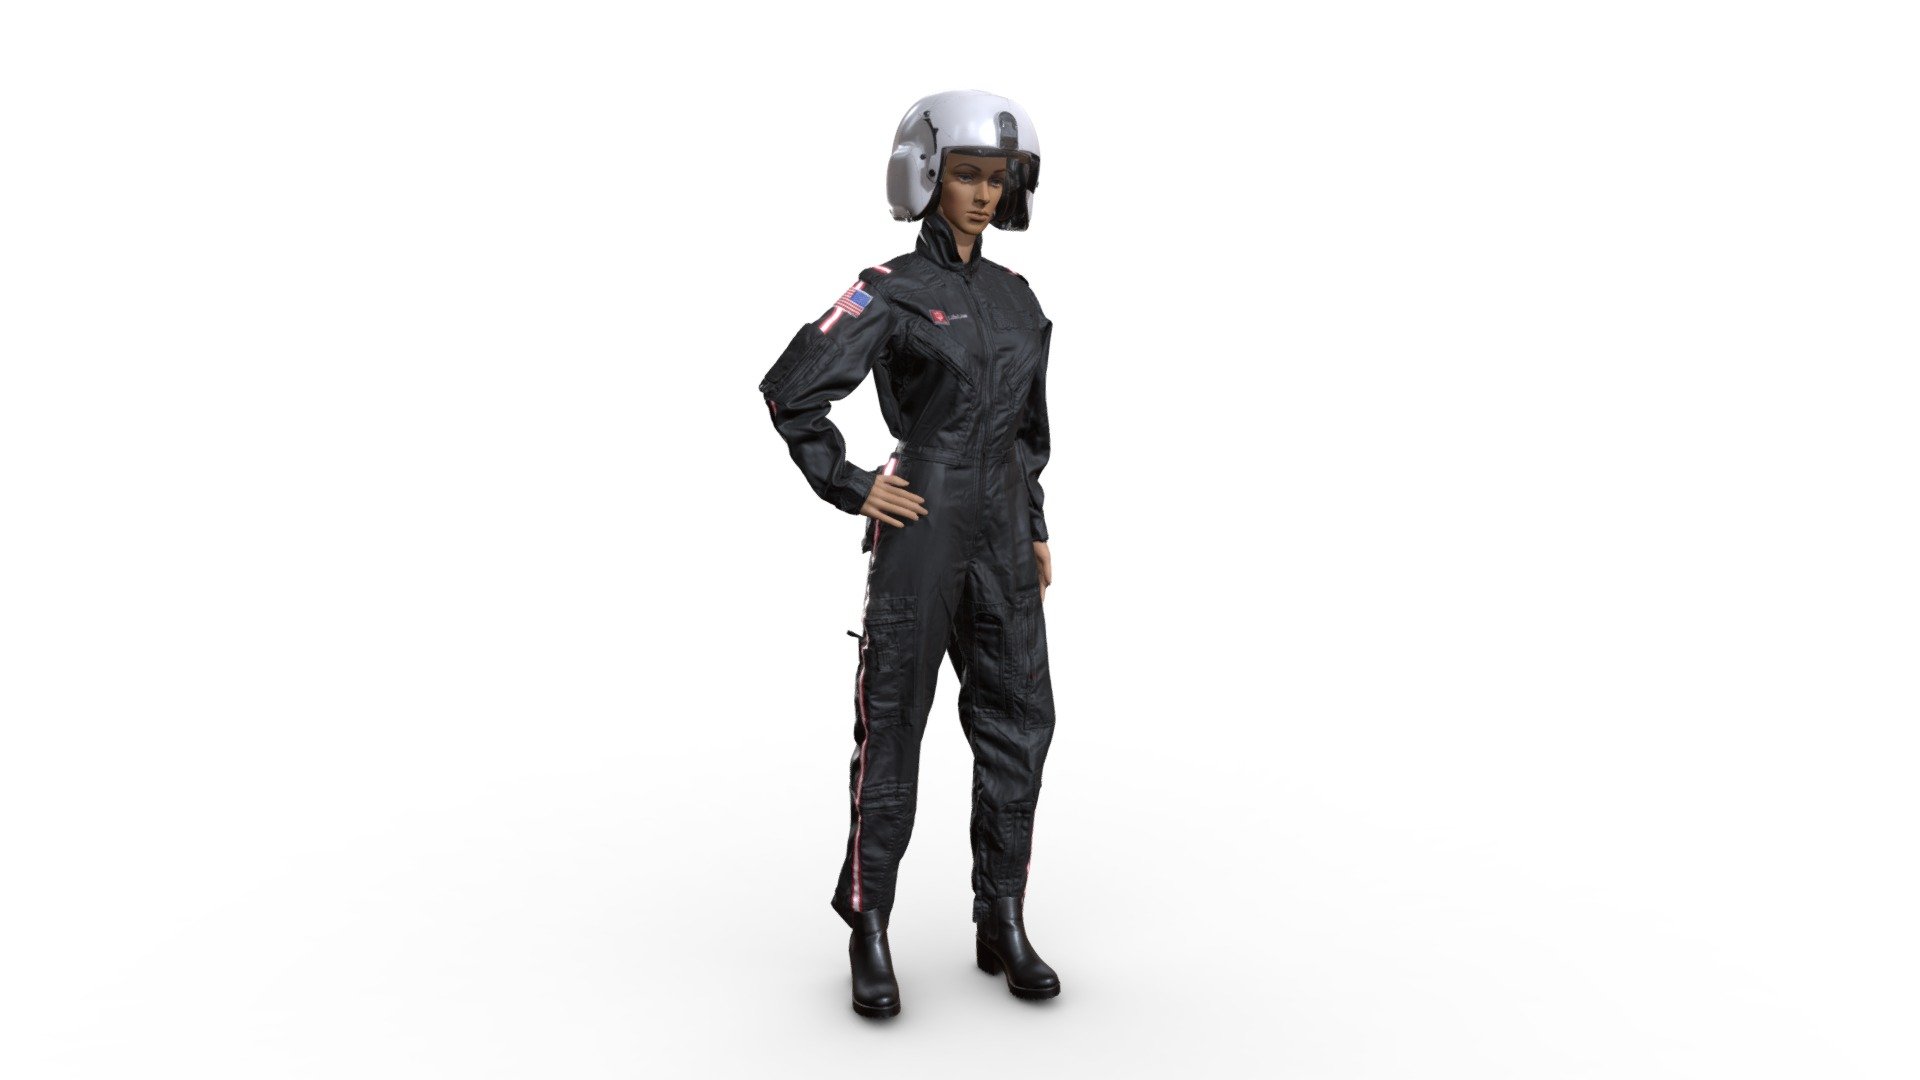 This is the IU Health Flight Jumpsuit that that Emergency Services Department uses at IU Health Hopsitals.

Everything was 3D scanned with a Creaform Go! Scan Spark 3d model